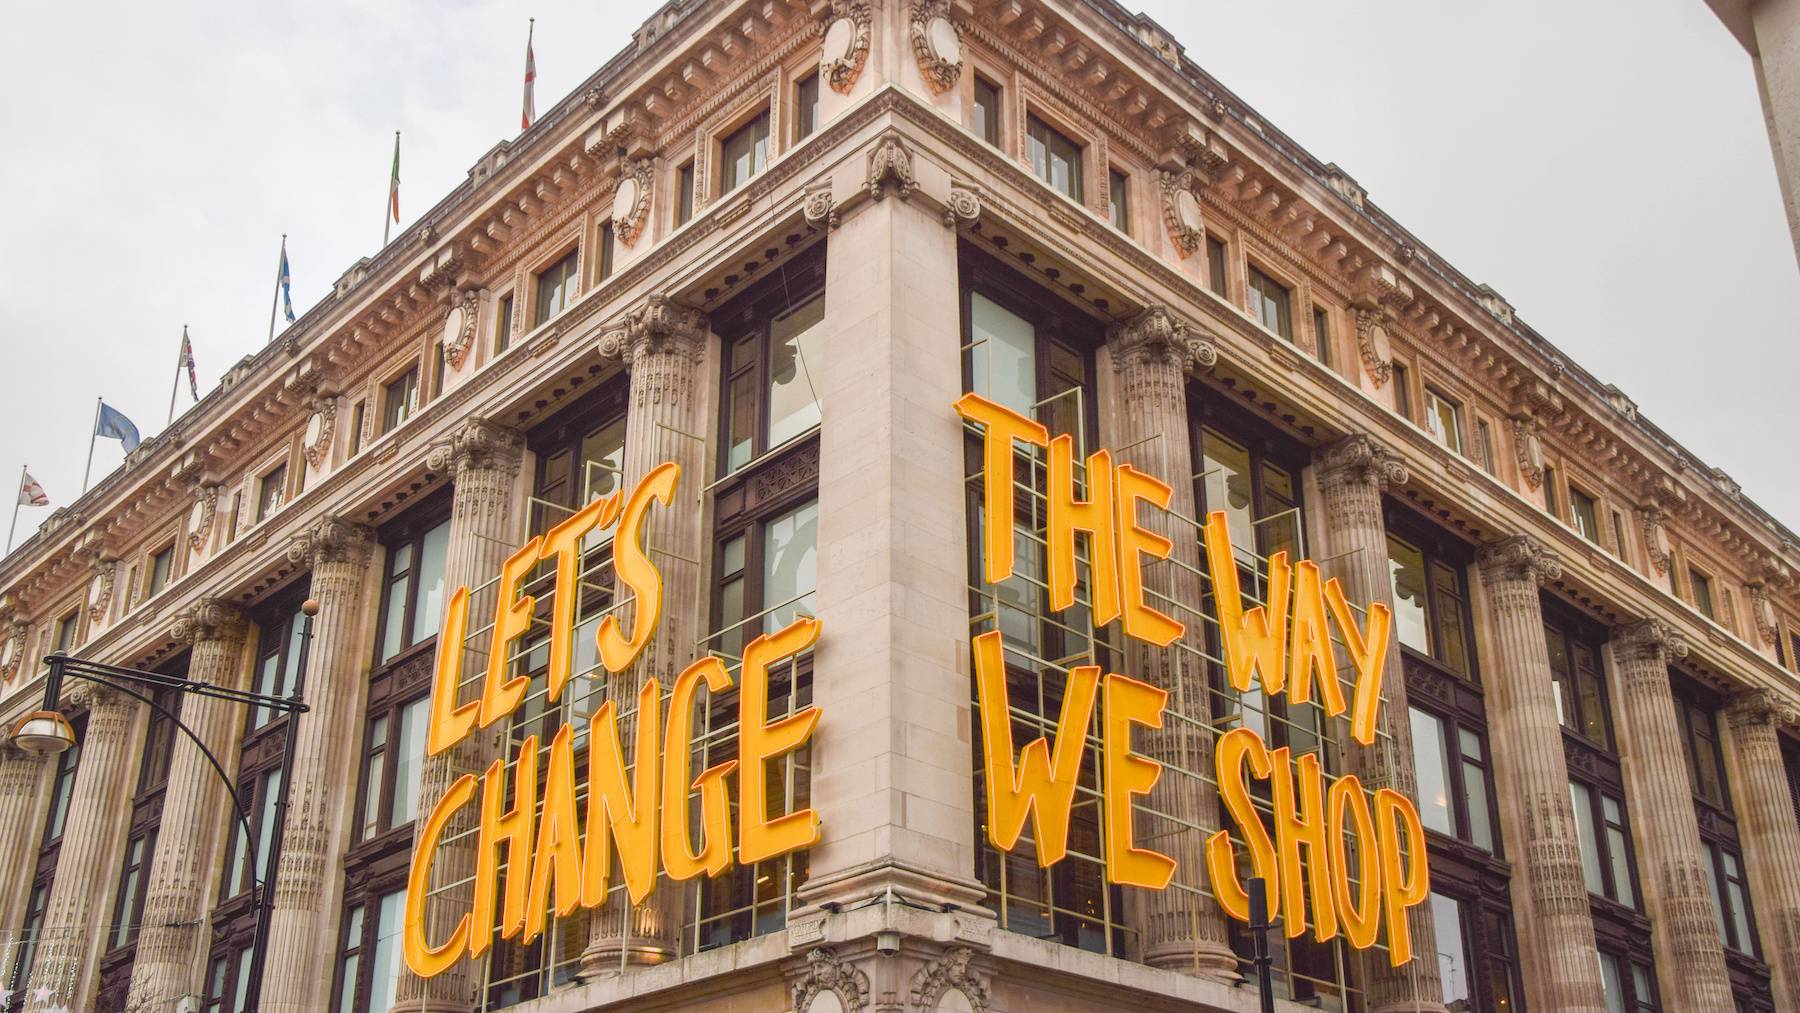 Selfridges' store front on London's Oxford Street is covered in bright yellow letters spelling the words "Let's Change The Way We Shop."